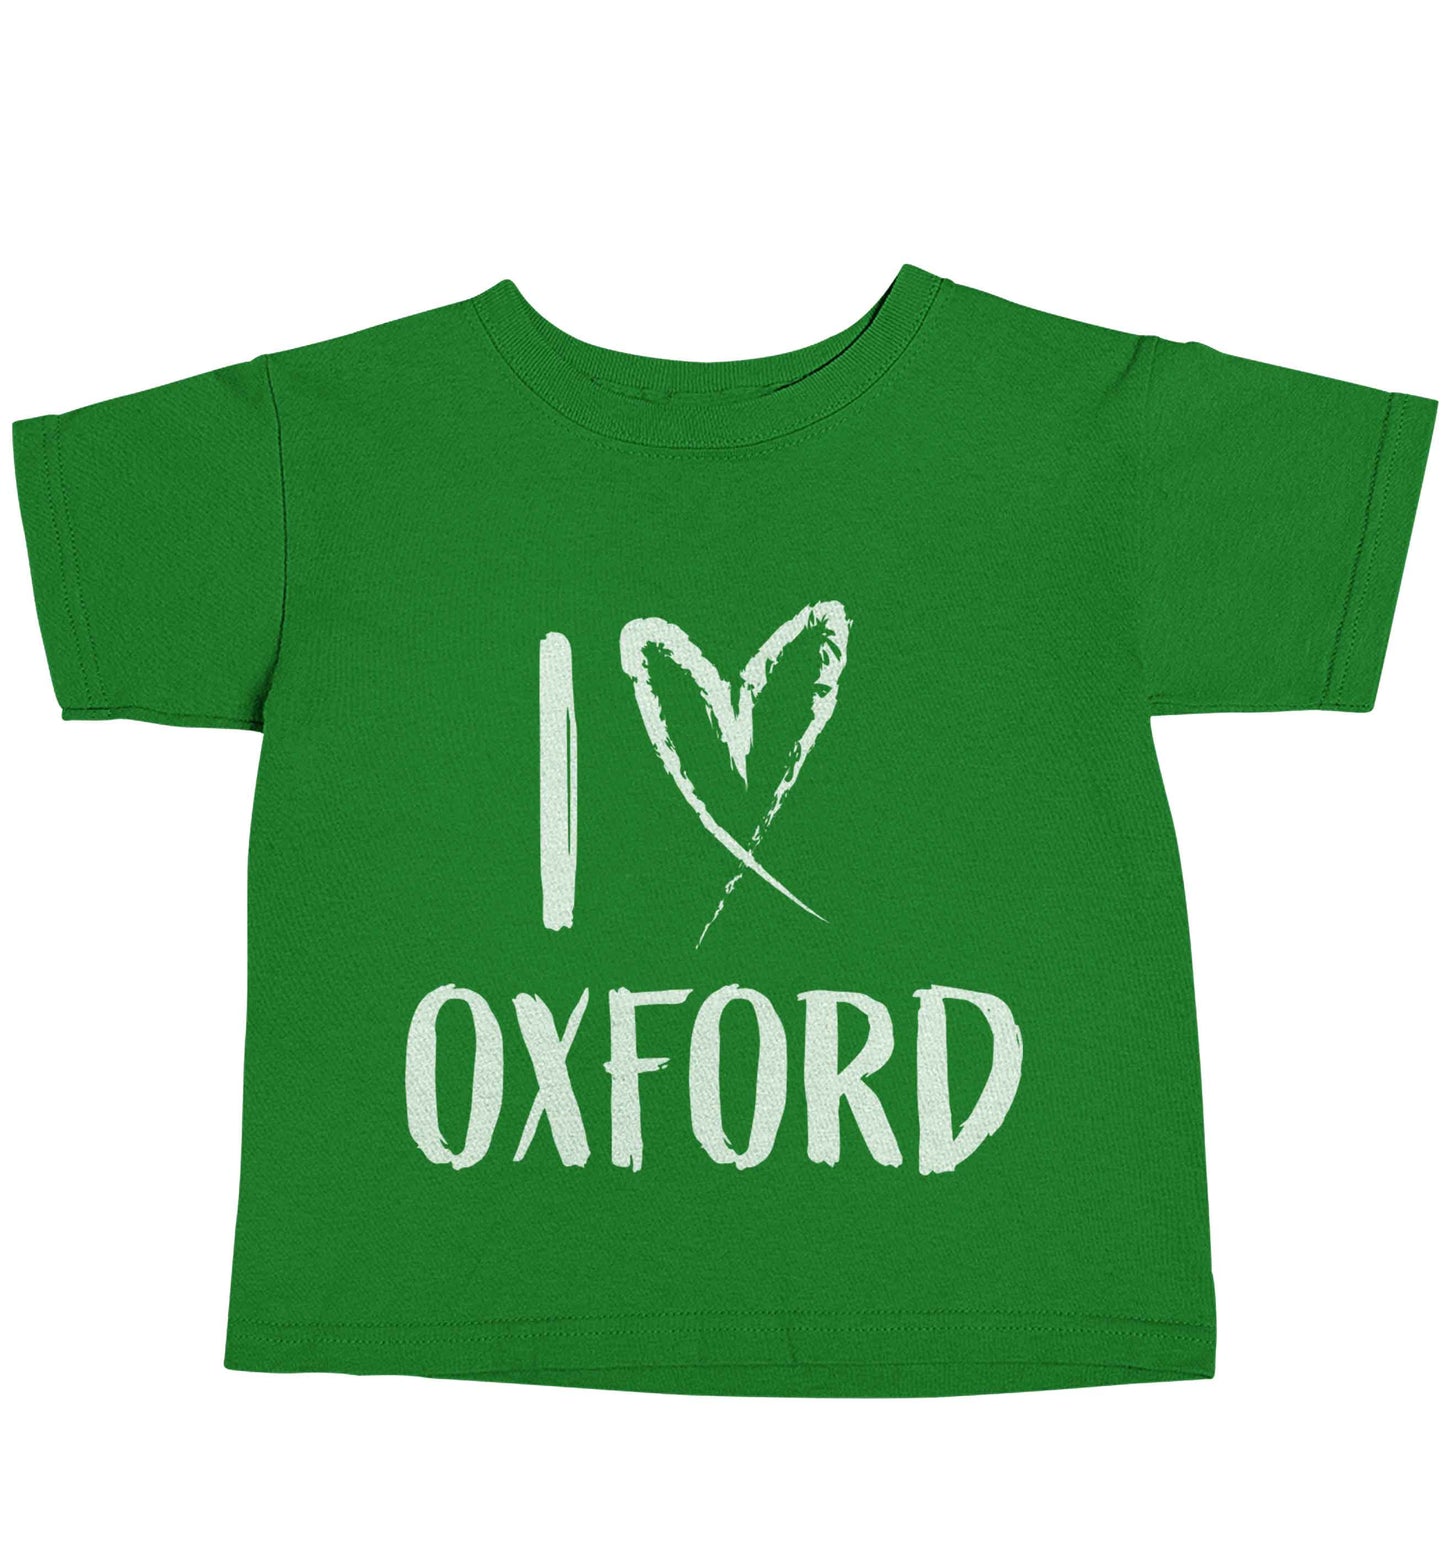 I love Oxford green baby toddler Tshirt 2 Years